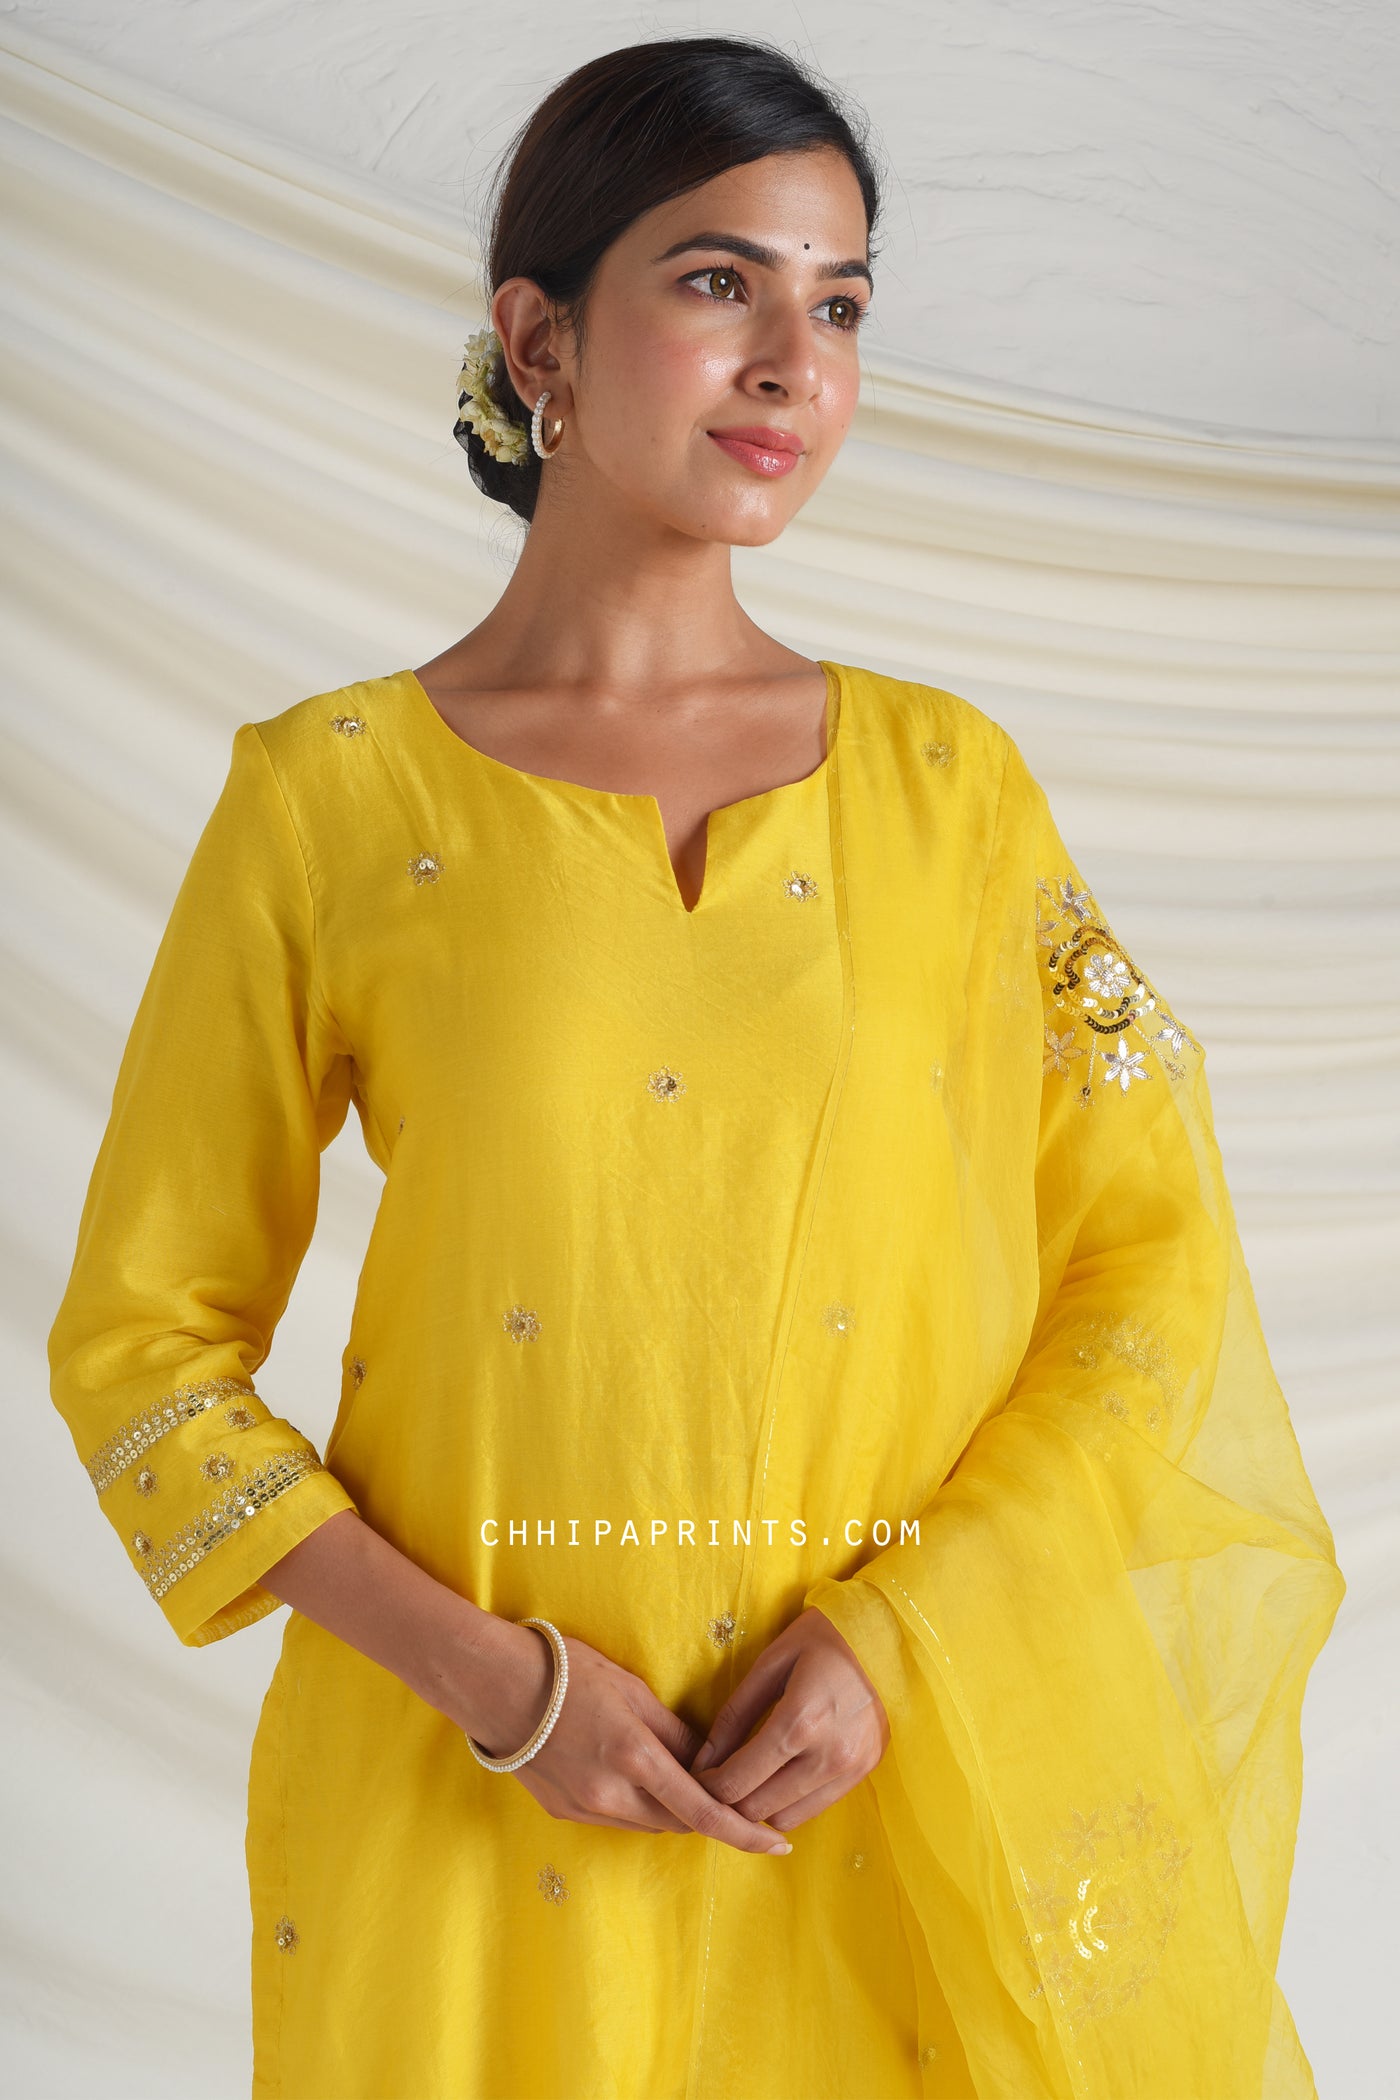 Chanderi Silk Hand Embroidery Suit Set in Solar Yellow